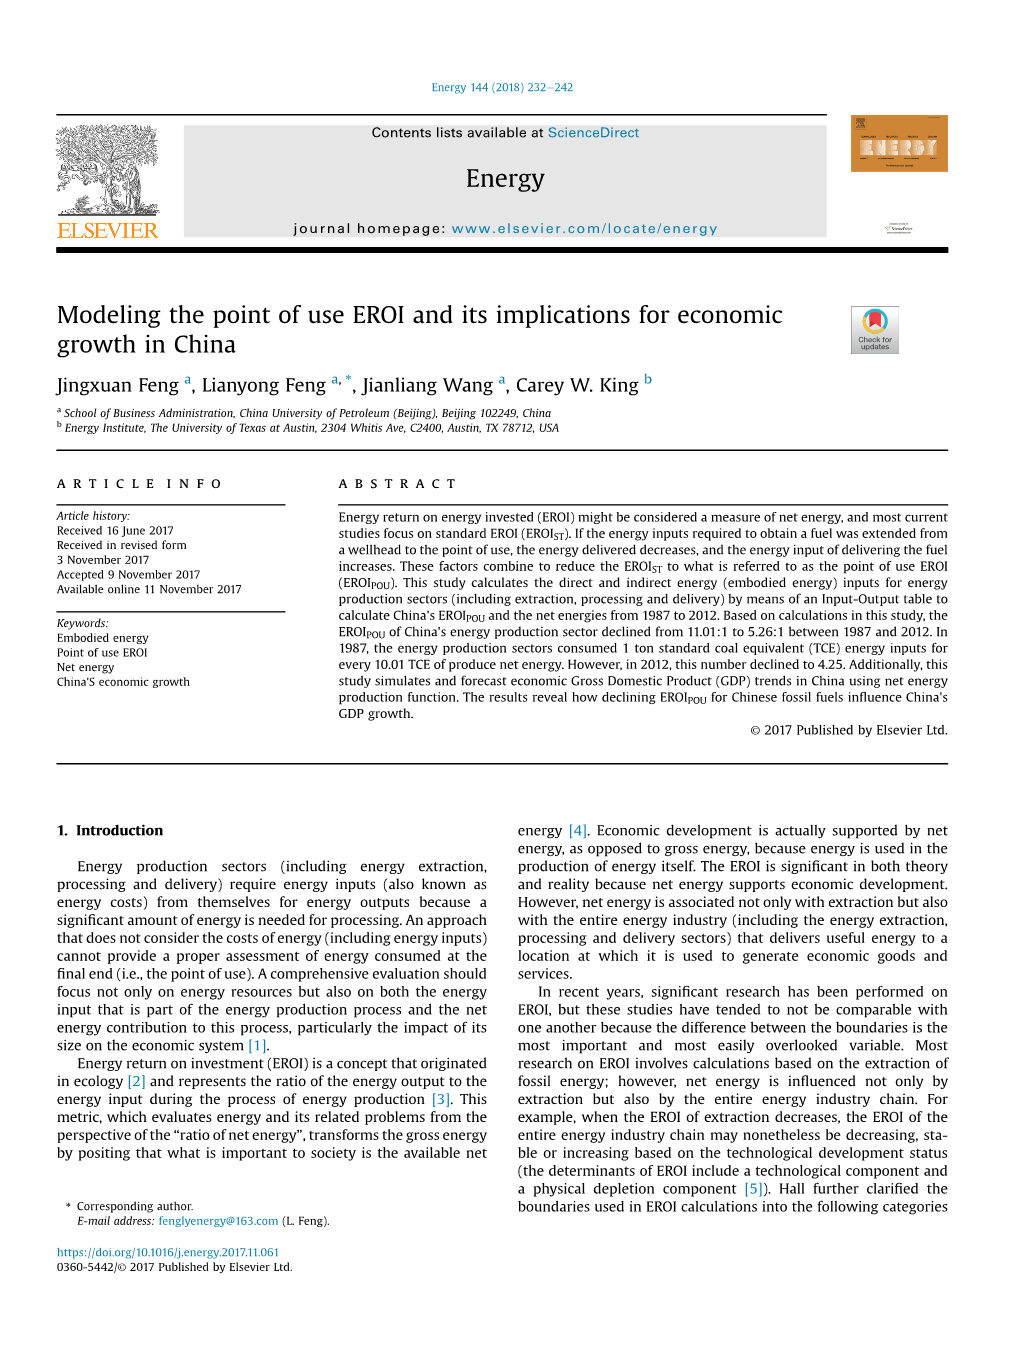 Modeling the Point of Use EROI and Its Implications for Economic Growth in China